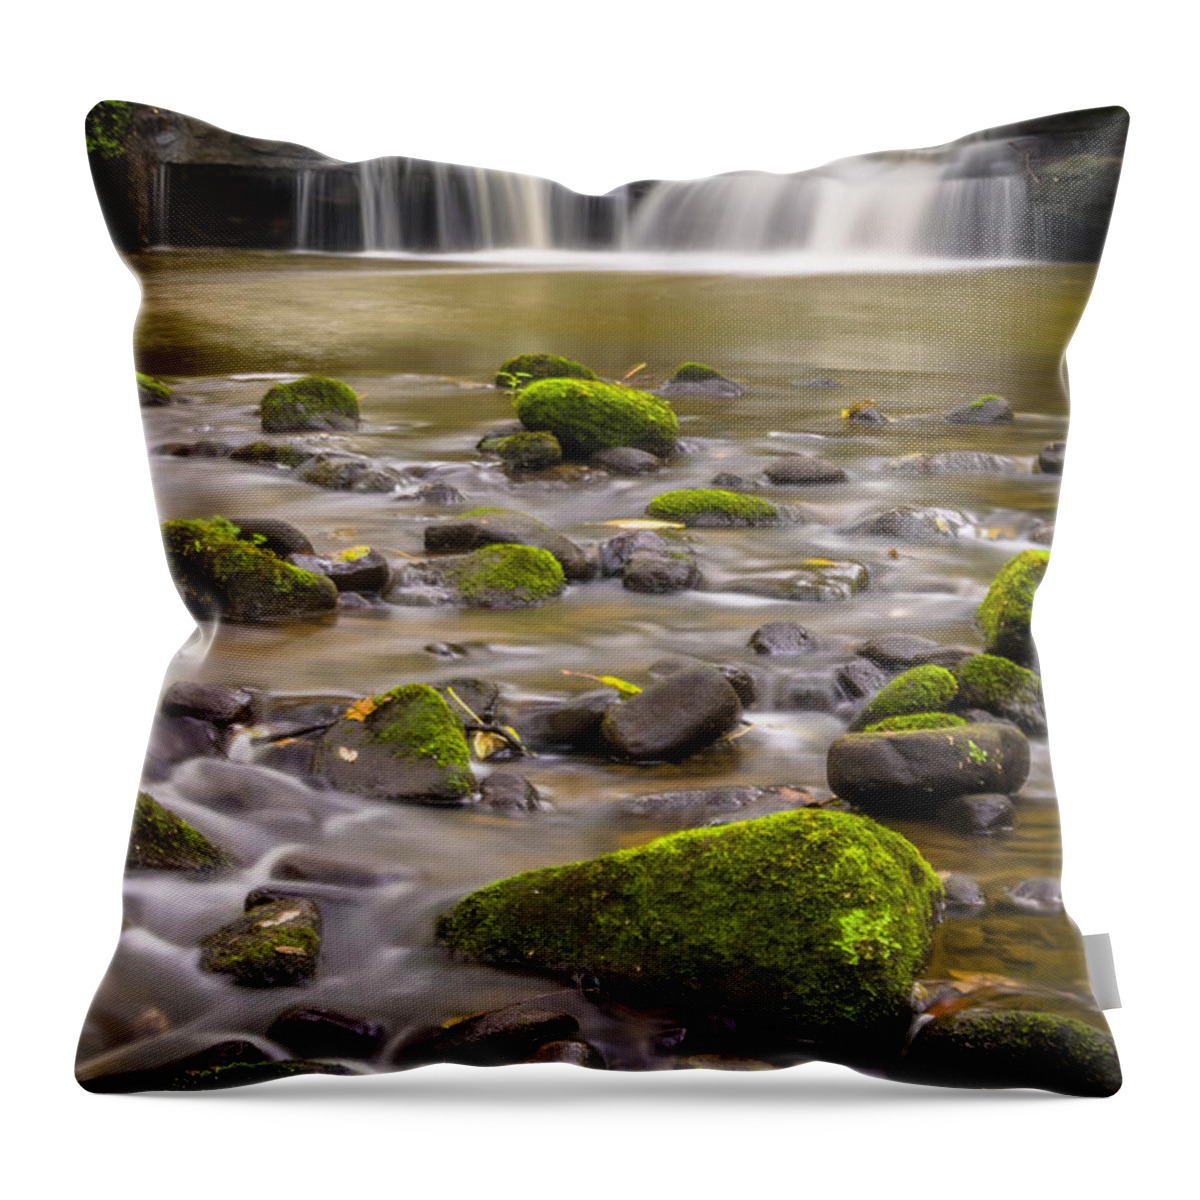 Airedale Throw Pillow featuring the photograph Goit Stock Waterfall by Mariusz Talarek